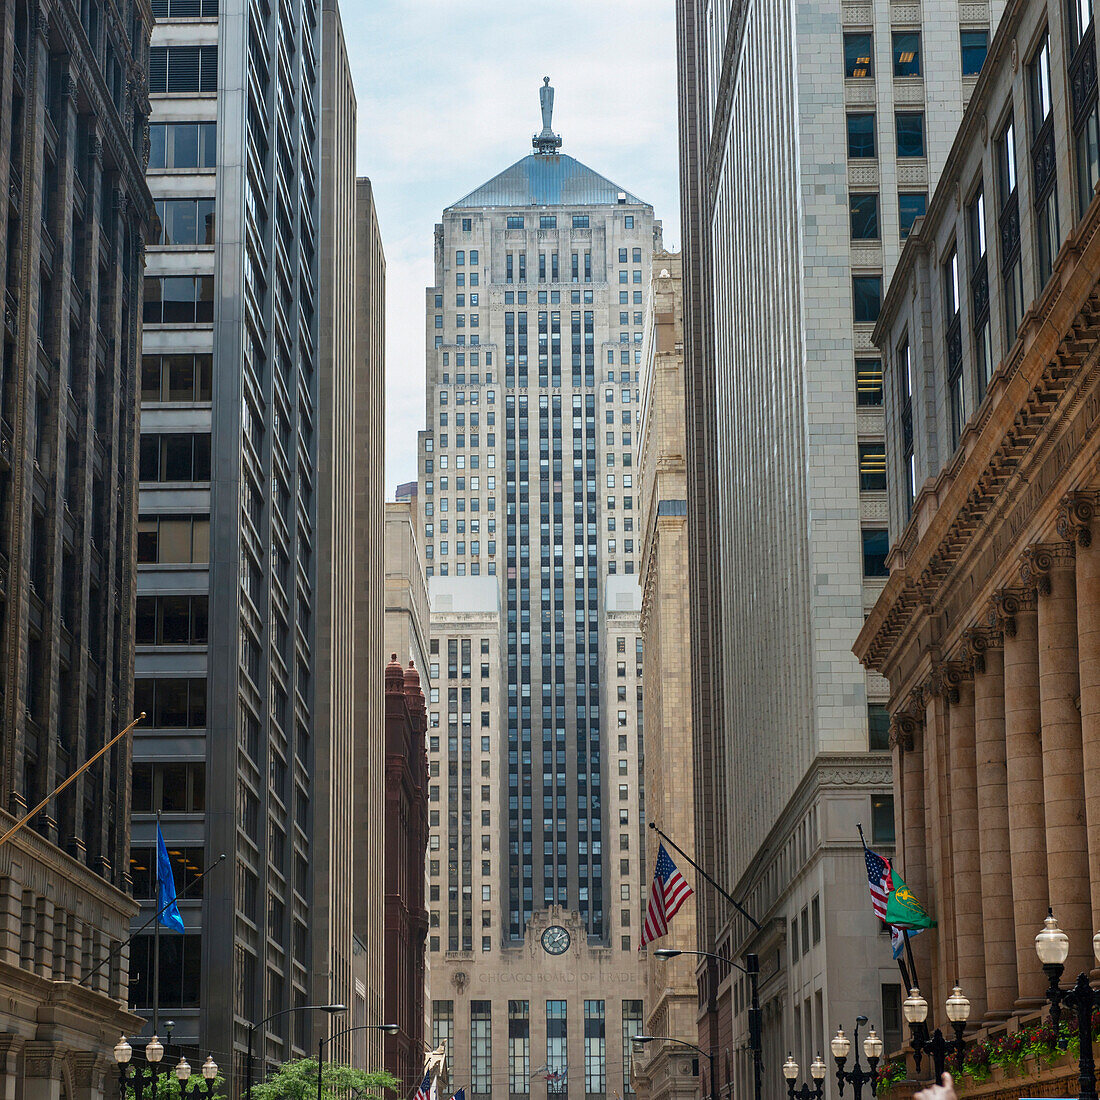 'Chicago board of trade building;Chicago illinois united states of america'